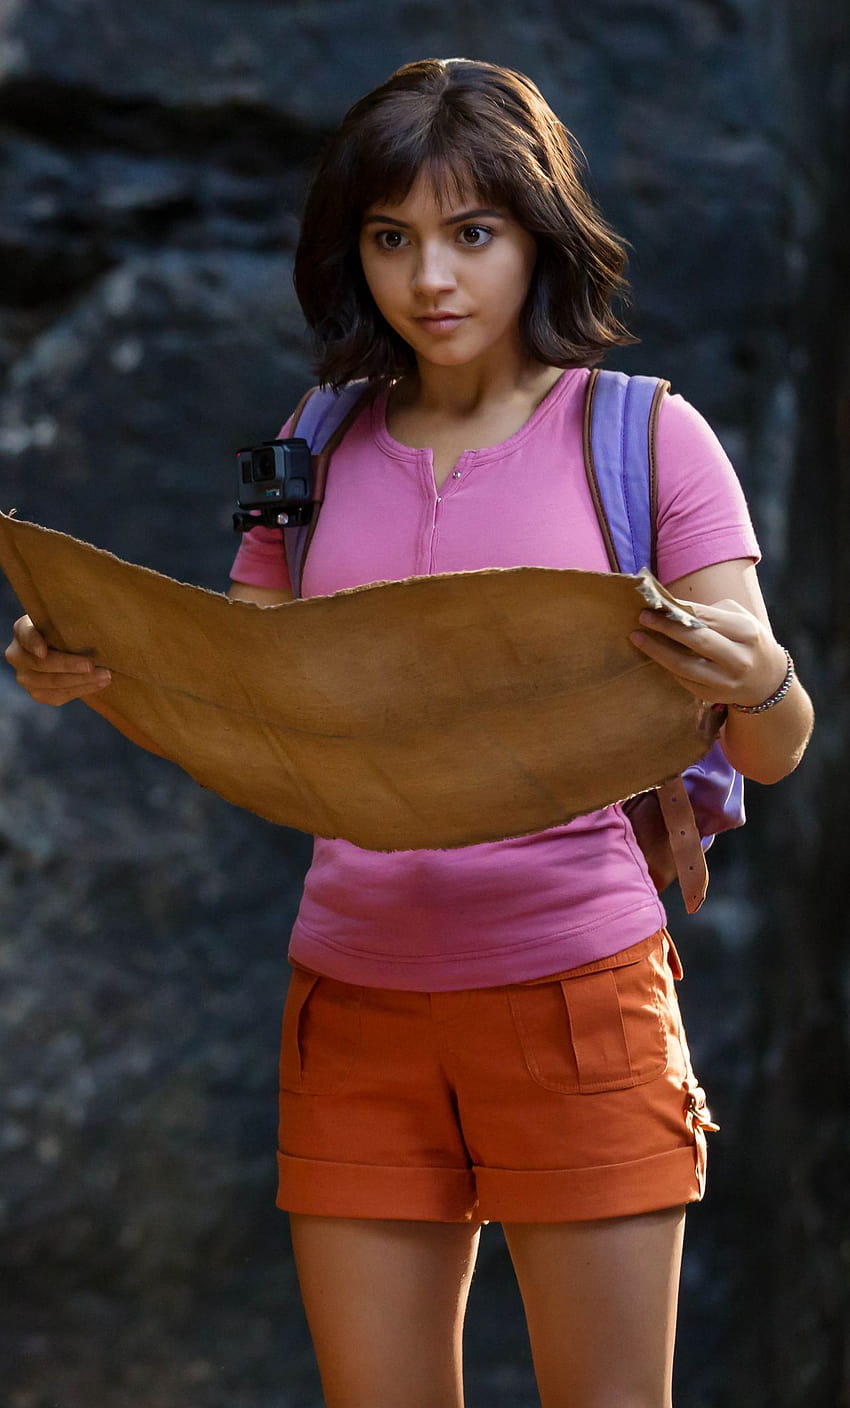 1280x2120 Isabela Moner In Dora and the Lost City of Gold iPhone 6 plus , Movies , and Backgrounds, isabela moner iphone HD telefon duvar kağıdı